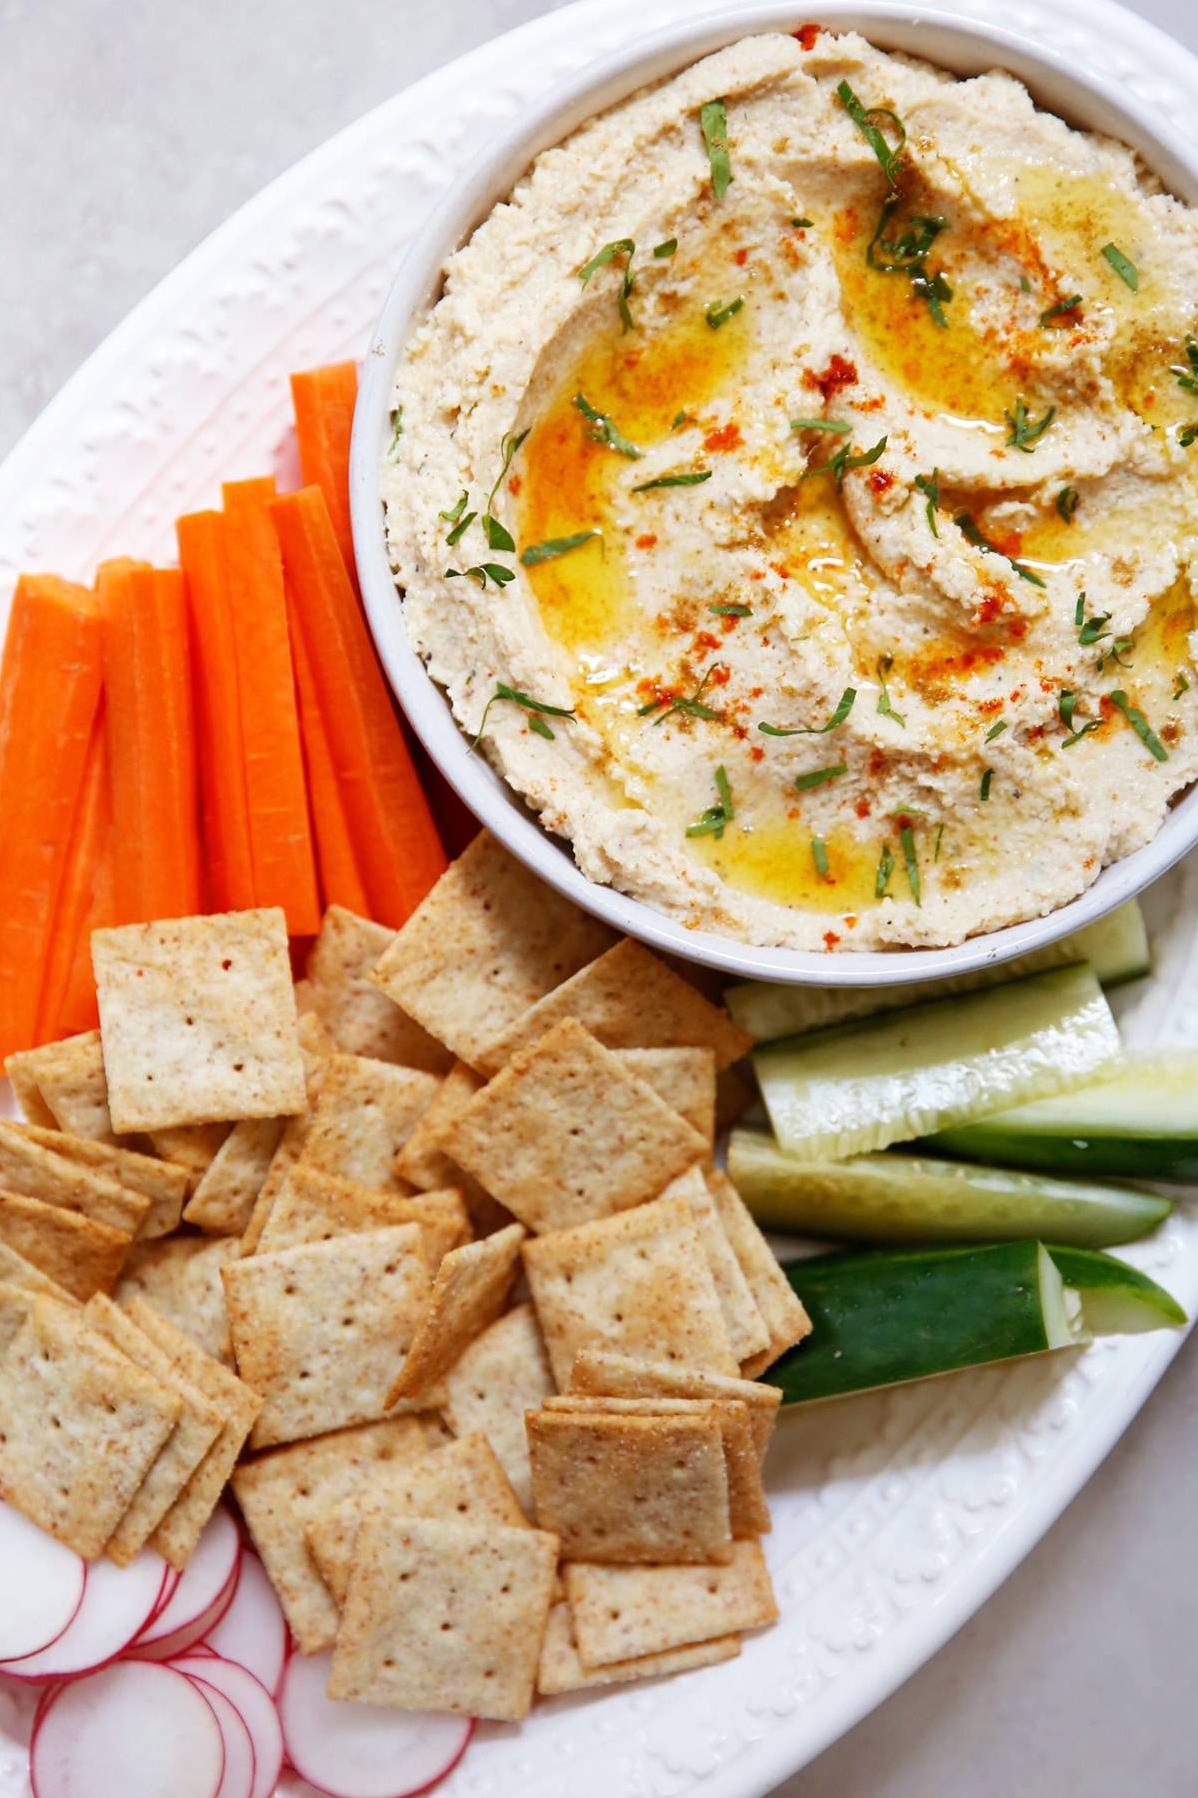  Put those fresh farmers' market veggies to good use with this dip.